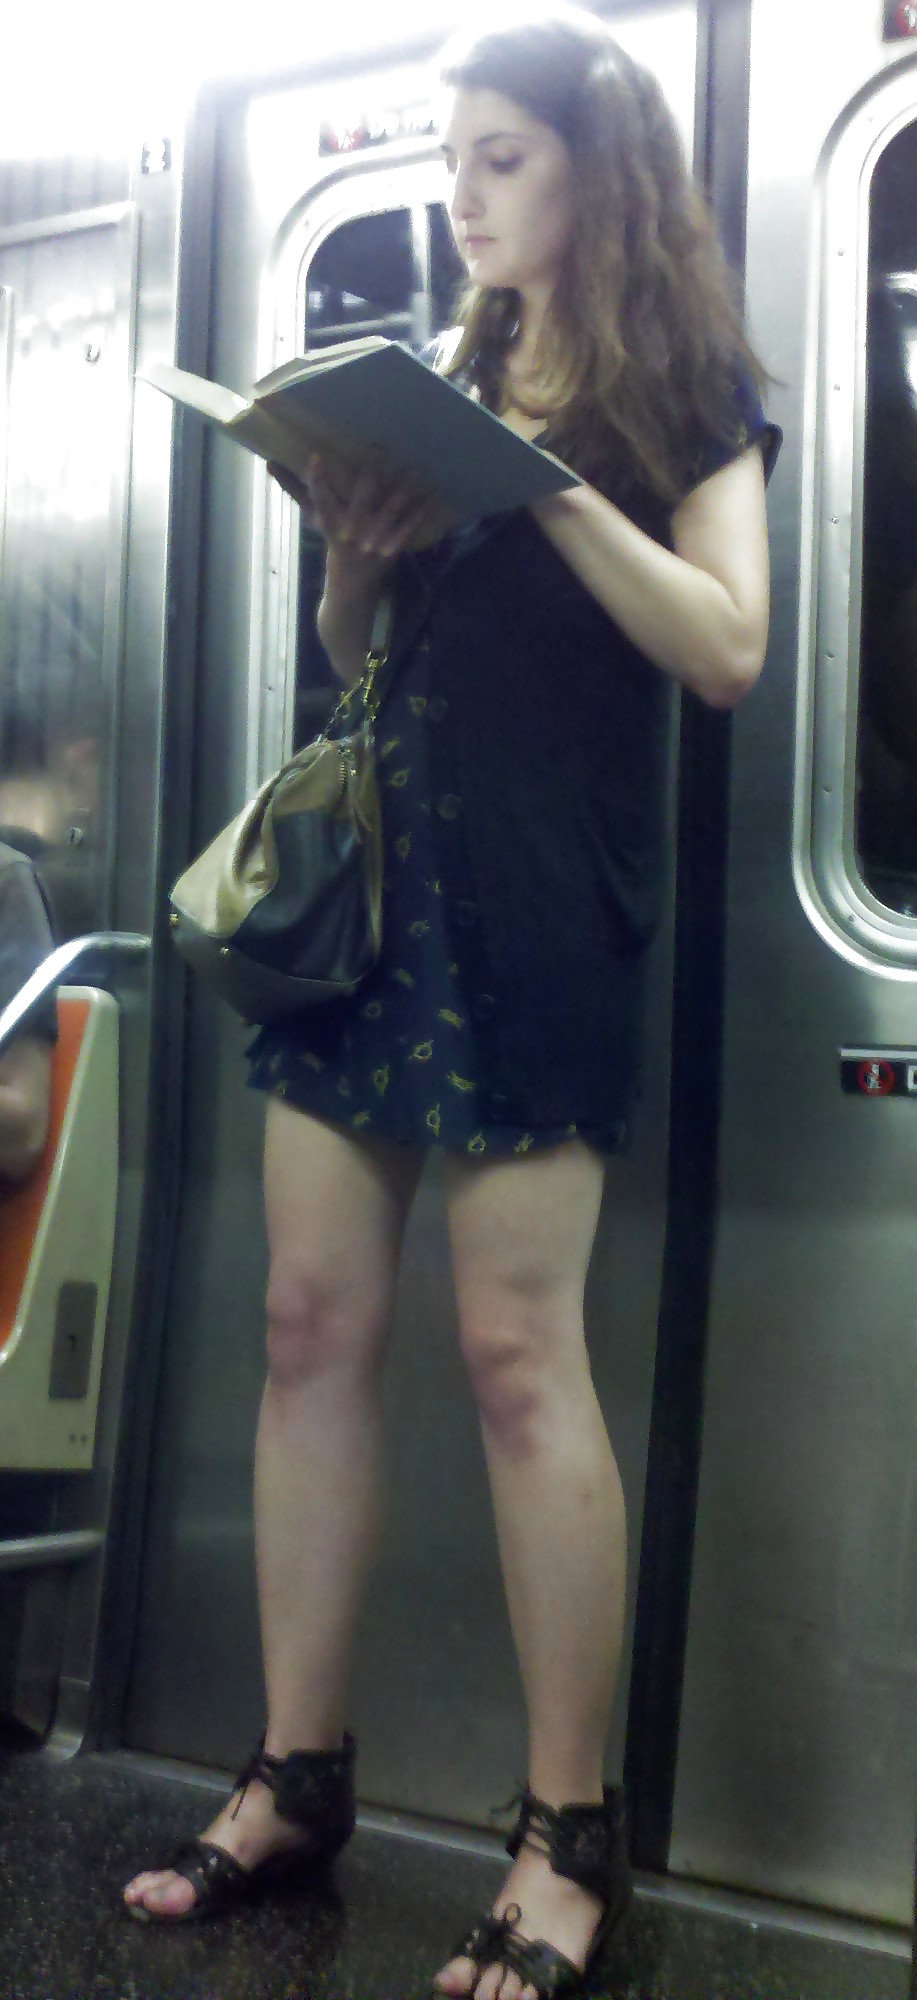 New York Subway Girls Compilation 1 - Legs and Thighs #6590240